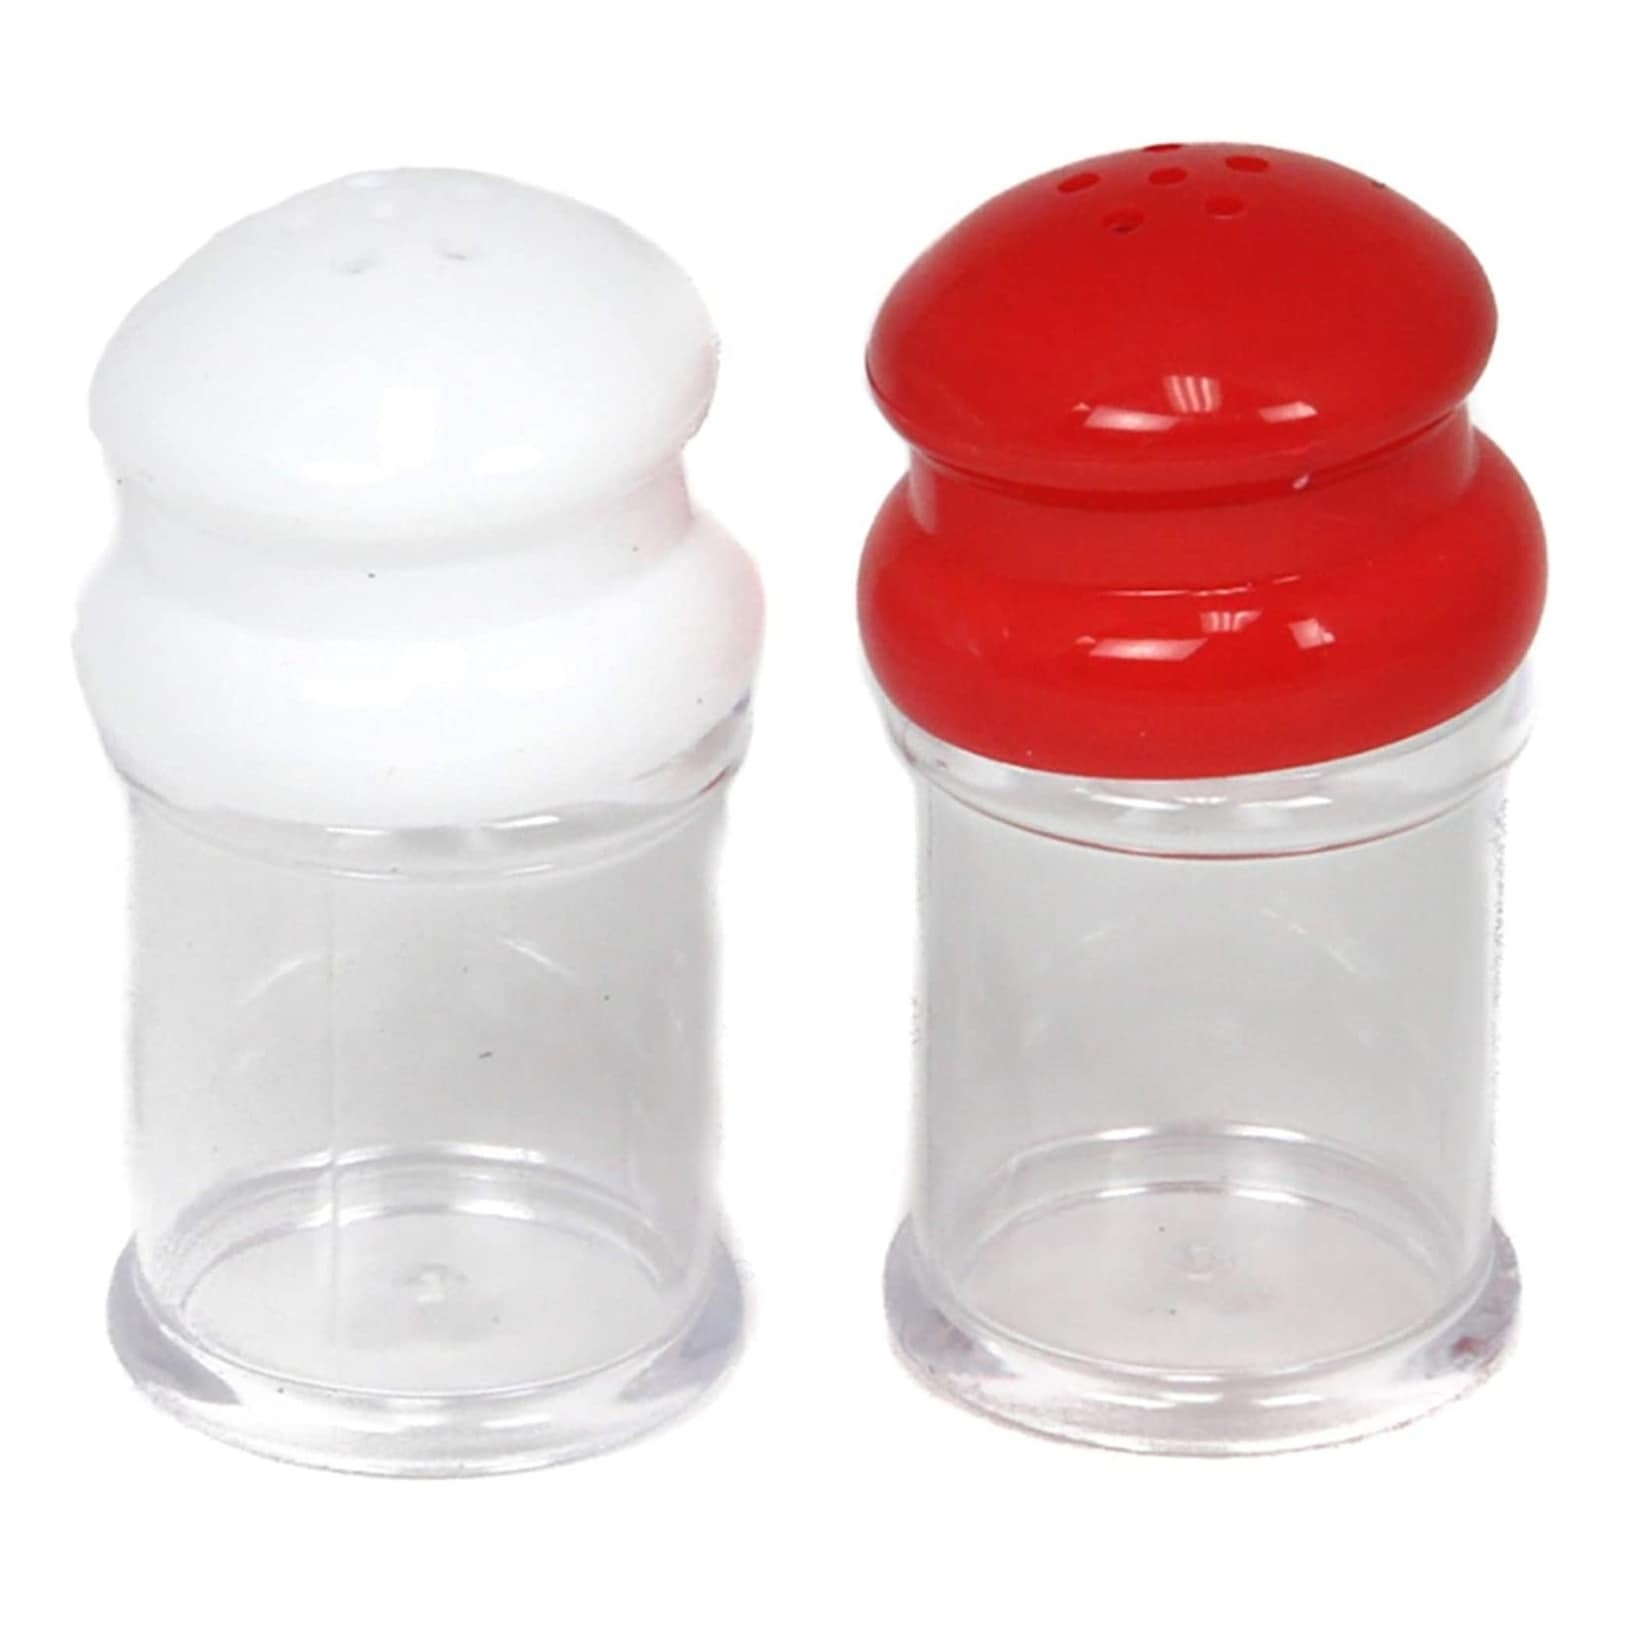 Chef Craft 3.5" Tall Durable Plastic Salt & Pepper Shaker Set - Great Size for Table or Camping Use